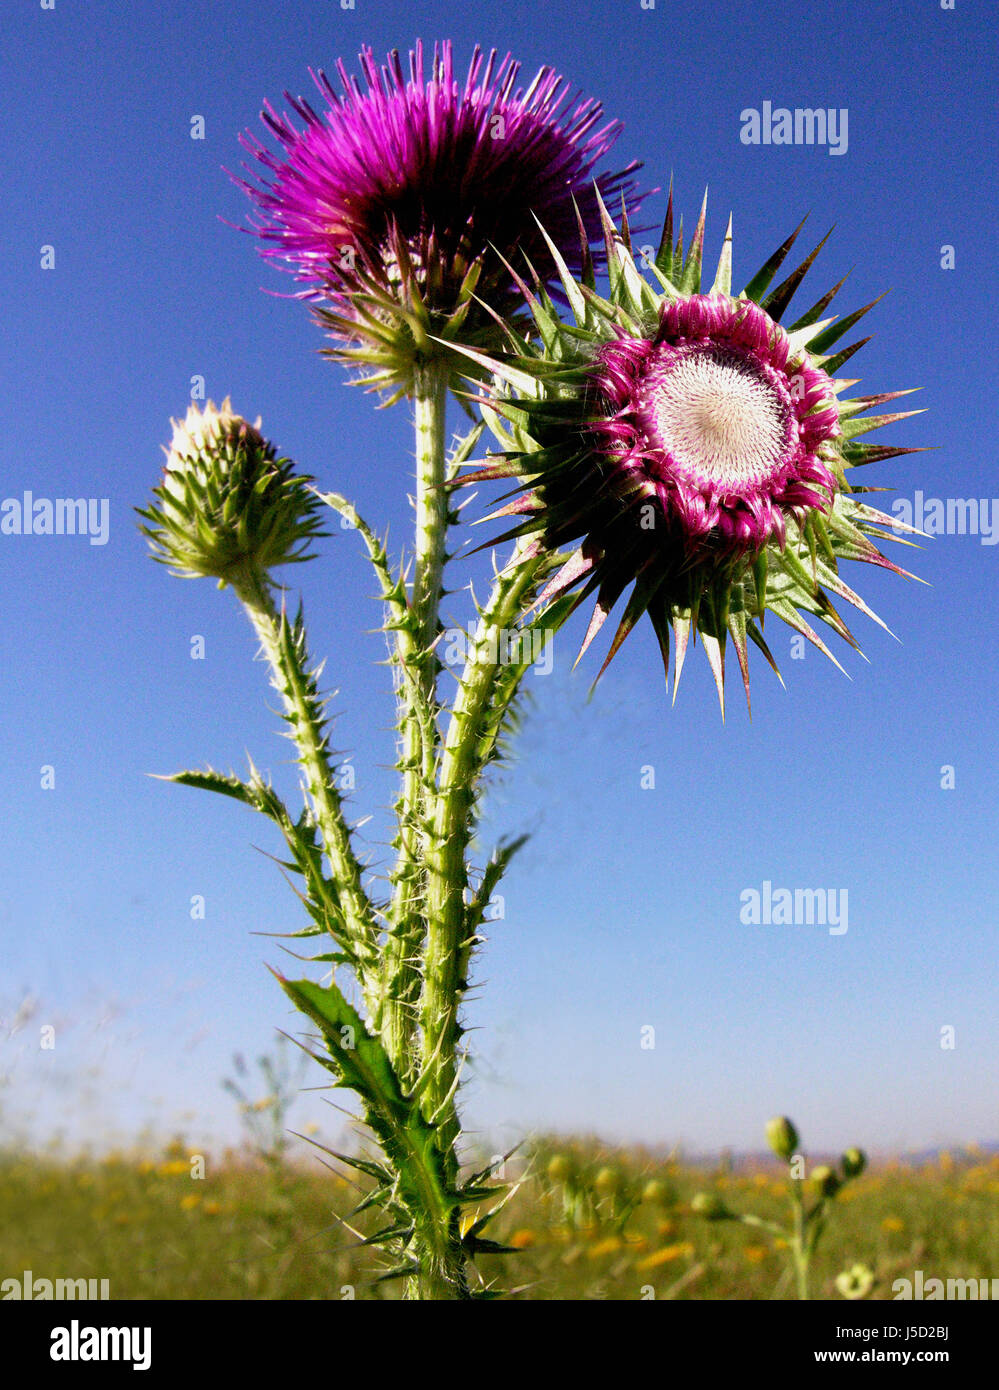 plant flower flowers blossoms prickle meadows thistles bleed nature nickende Stock Photo